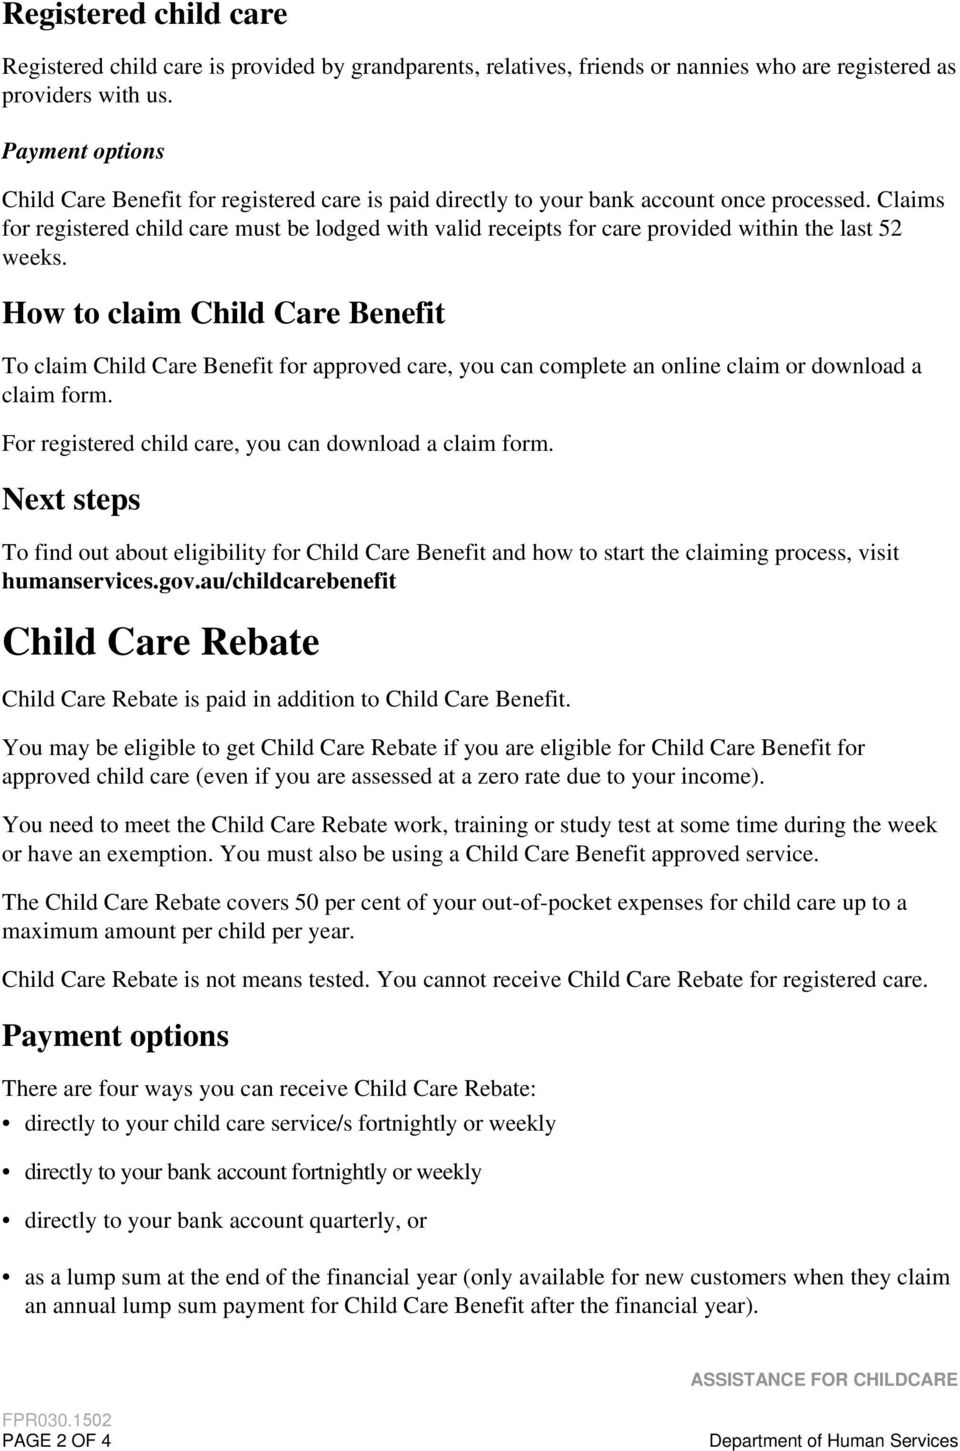 Claims for registered child care must be lodged with valid receipts for care provided within the last 52 weeks.